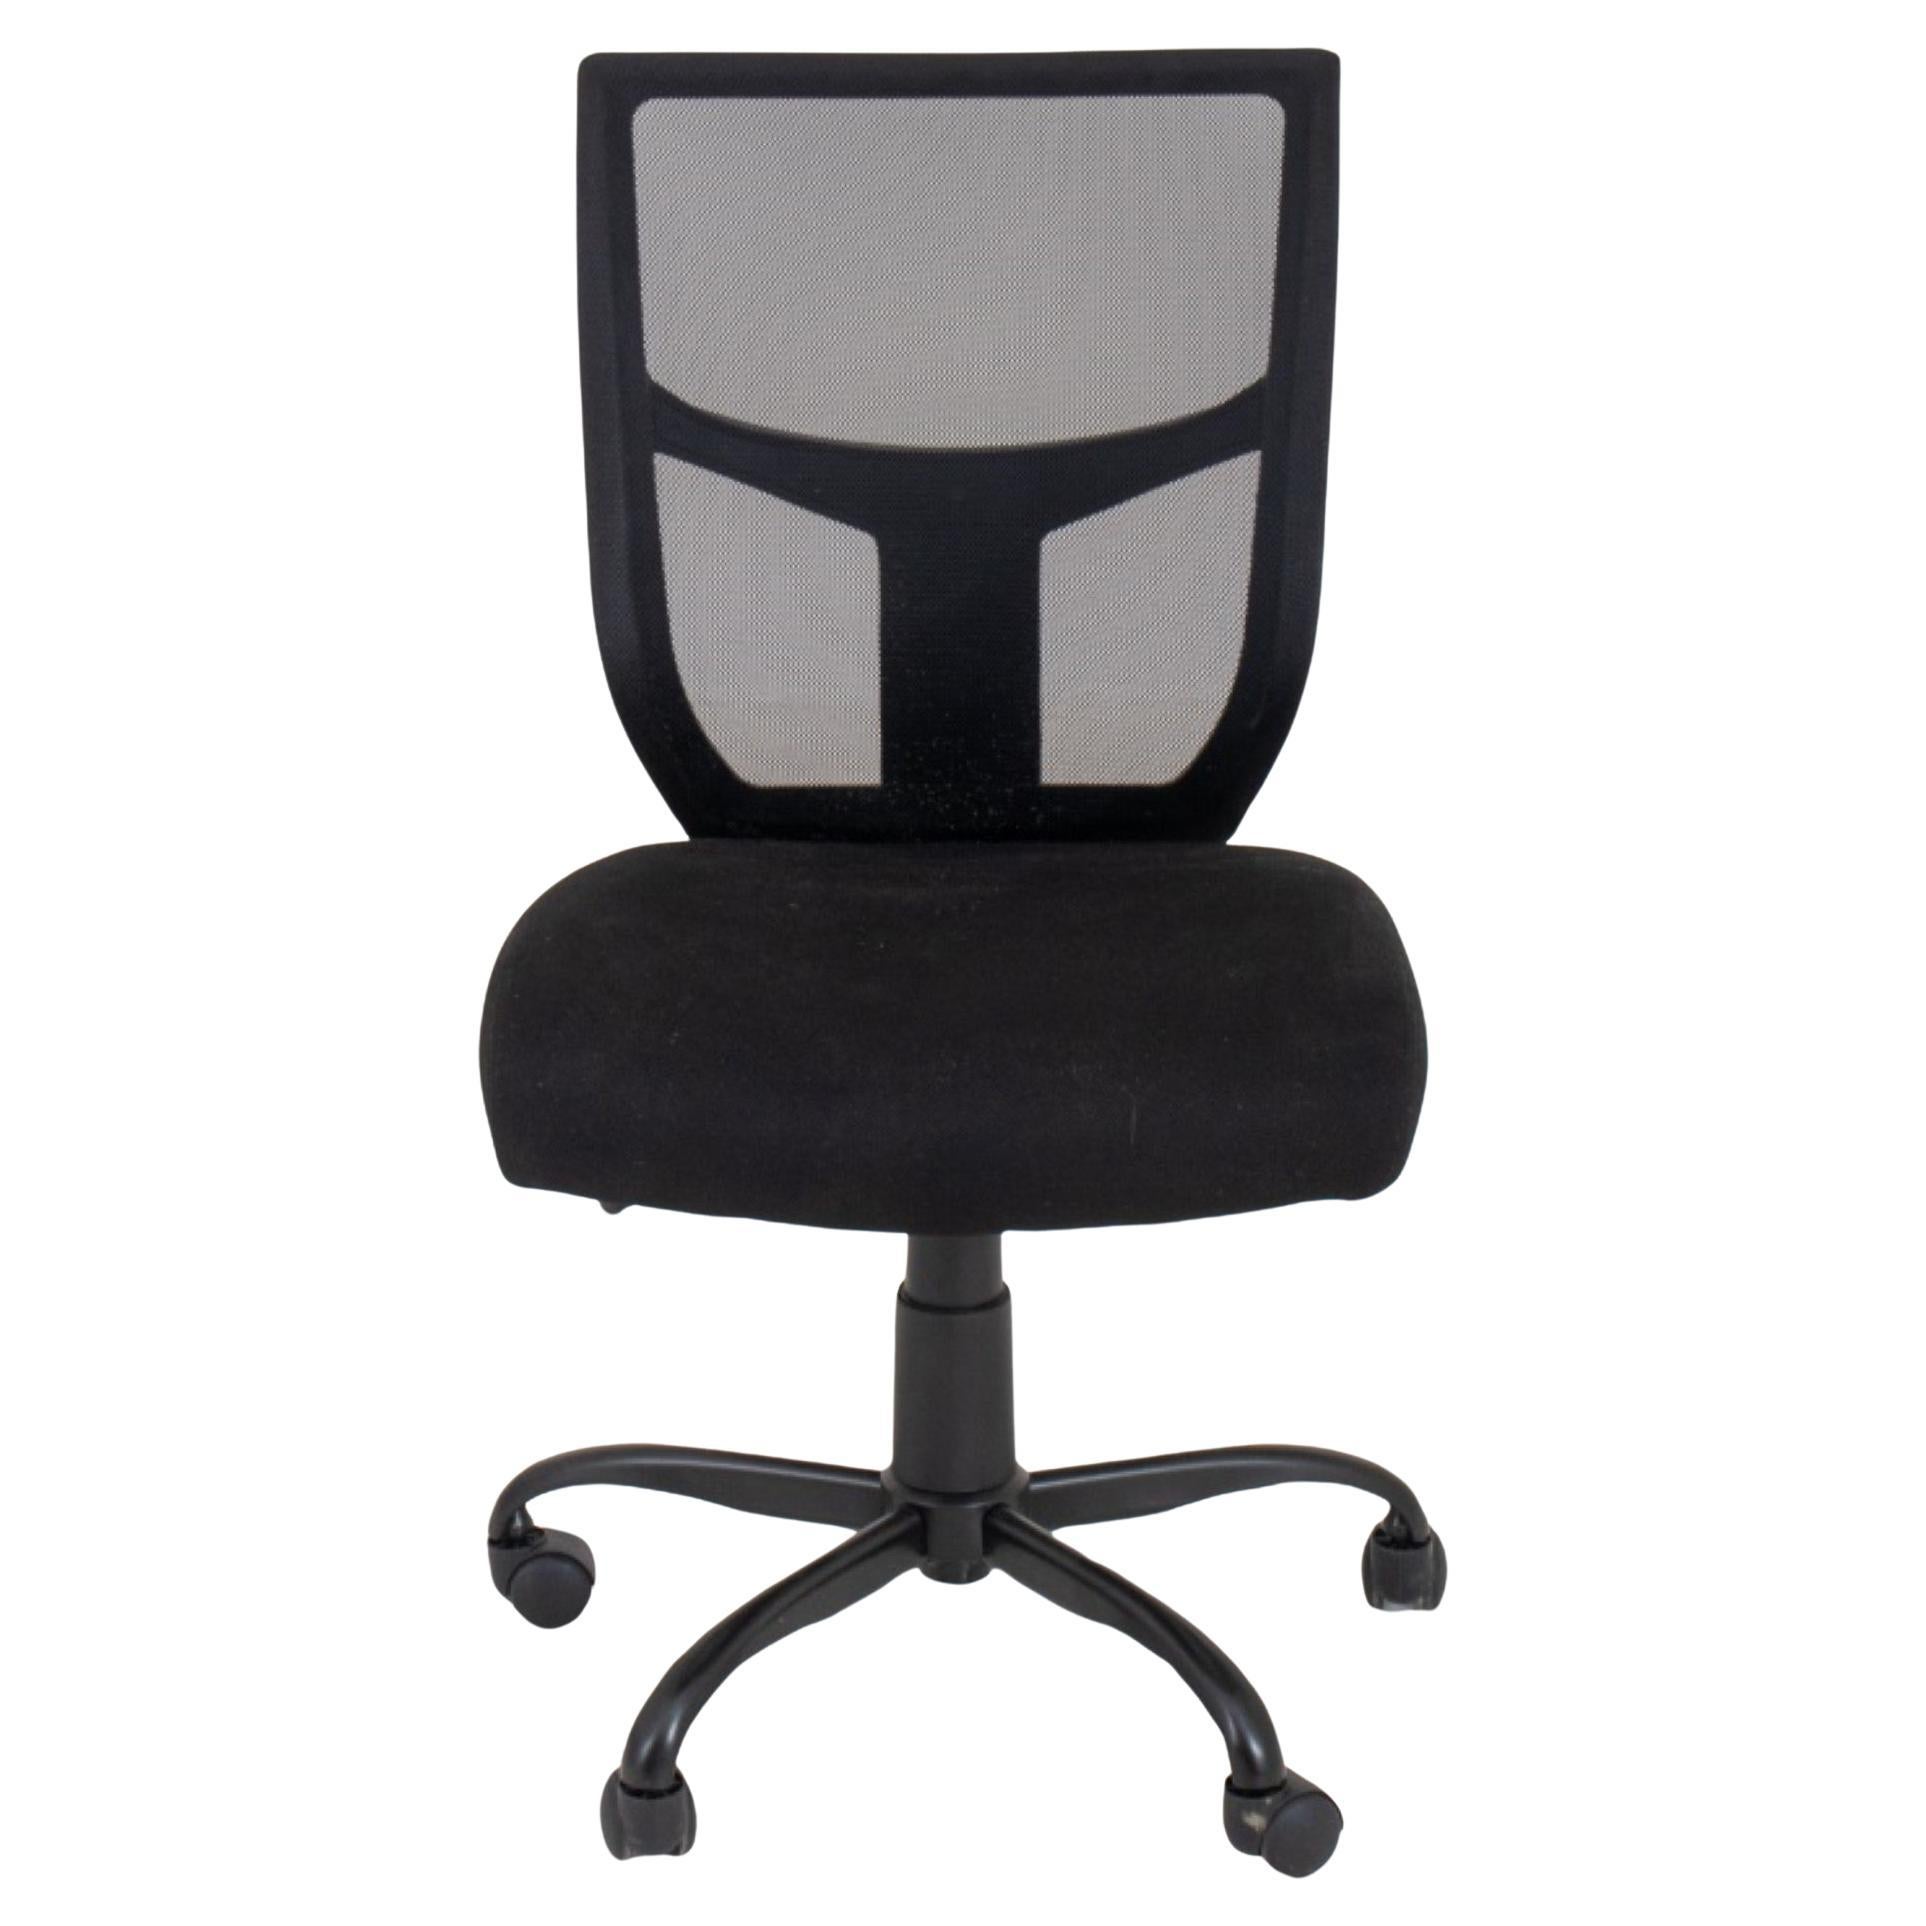 Black Fabric Office or Desk Chair